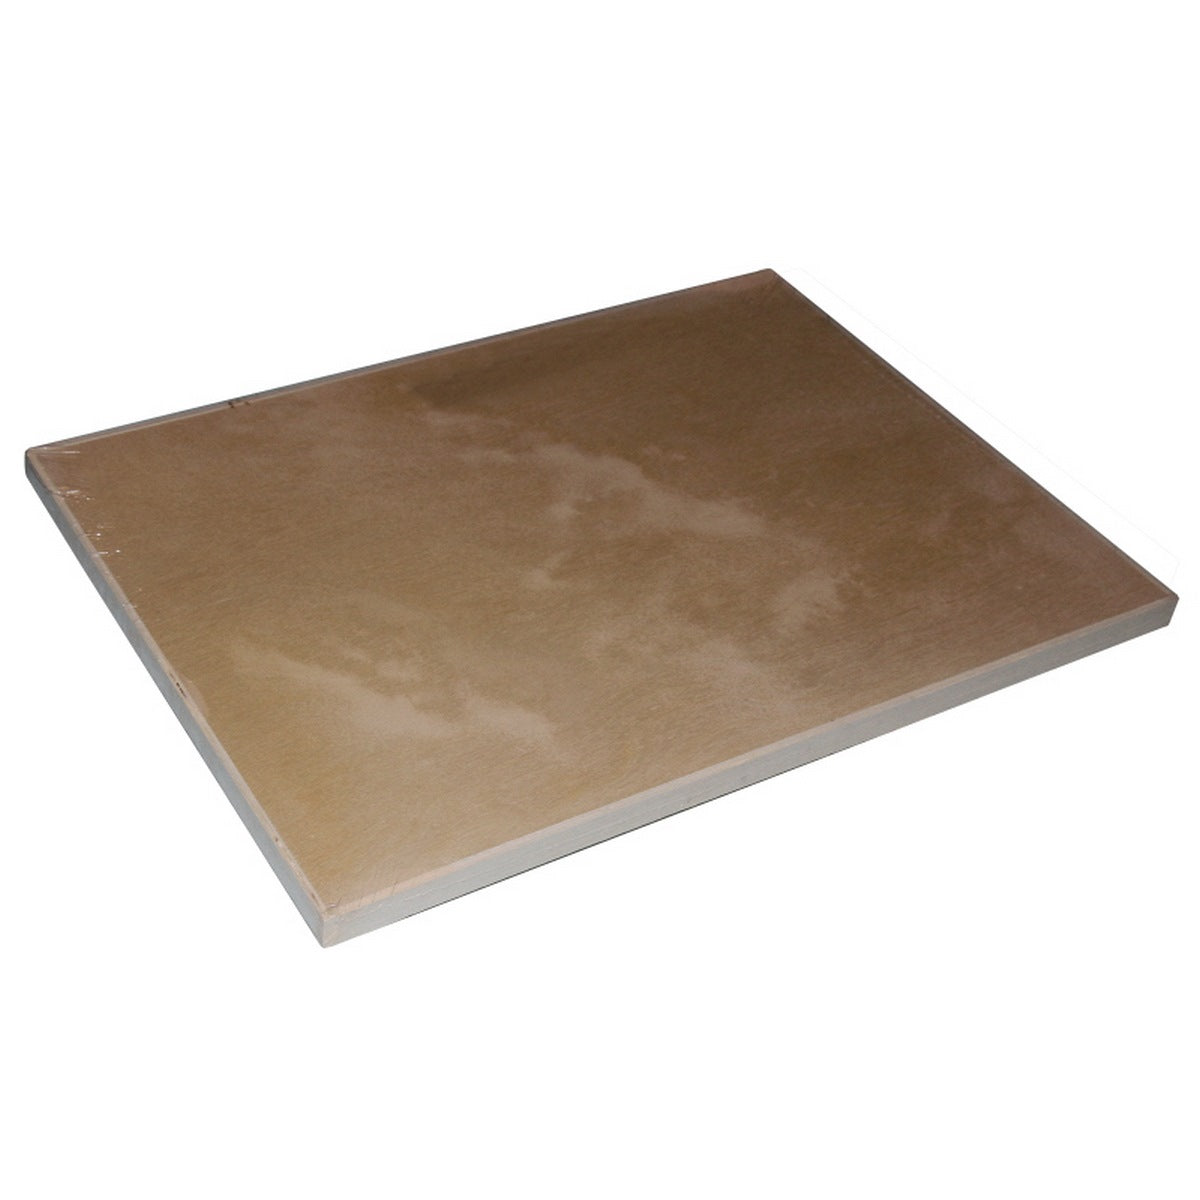 jags-mumbai Sketching Material Premium Wooden Drawing Board - Thick A3 Size for Artists and Creatives